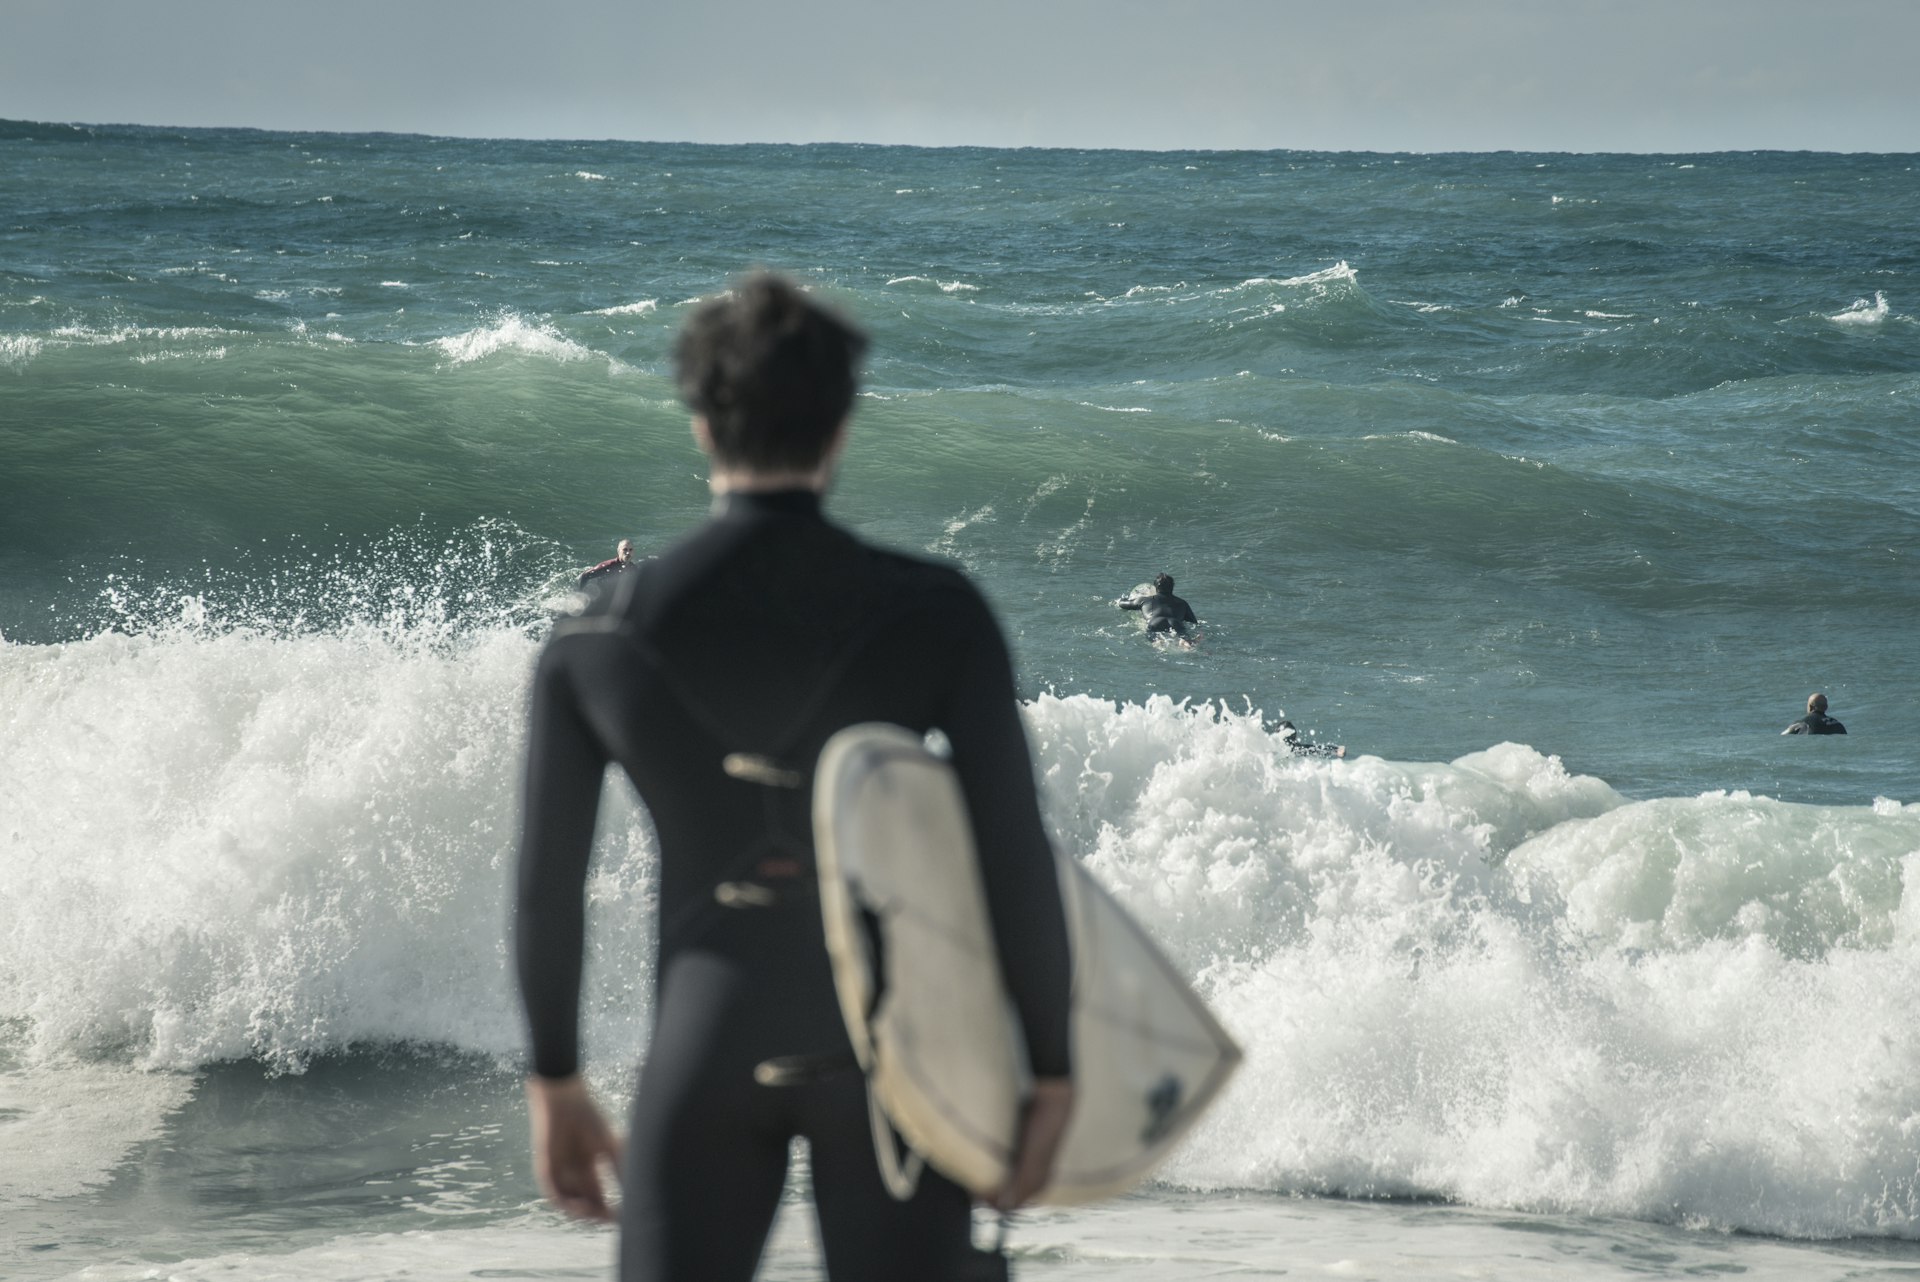 The back of a surfer holding a board and looking out to sea at other surfers approaching large waves